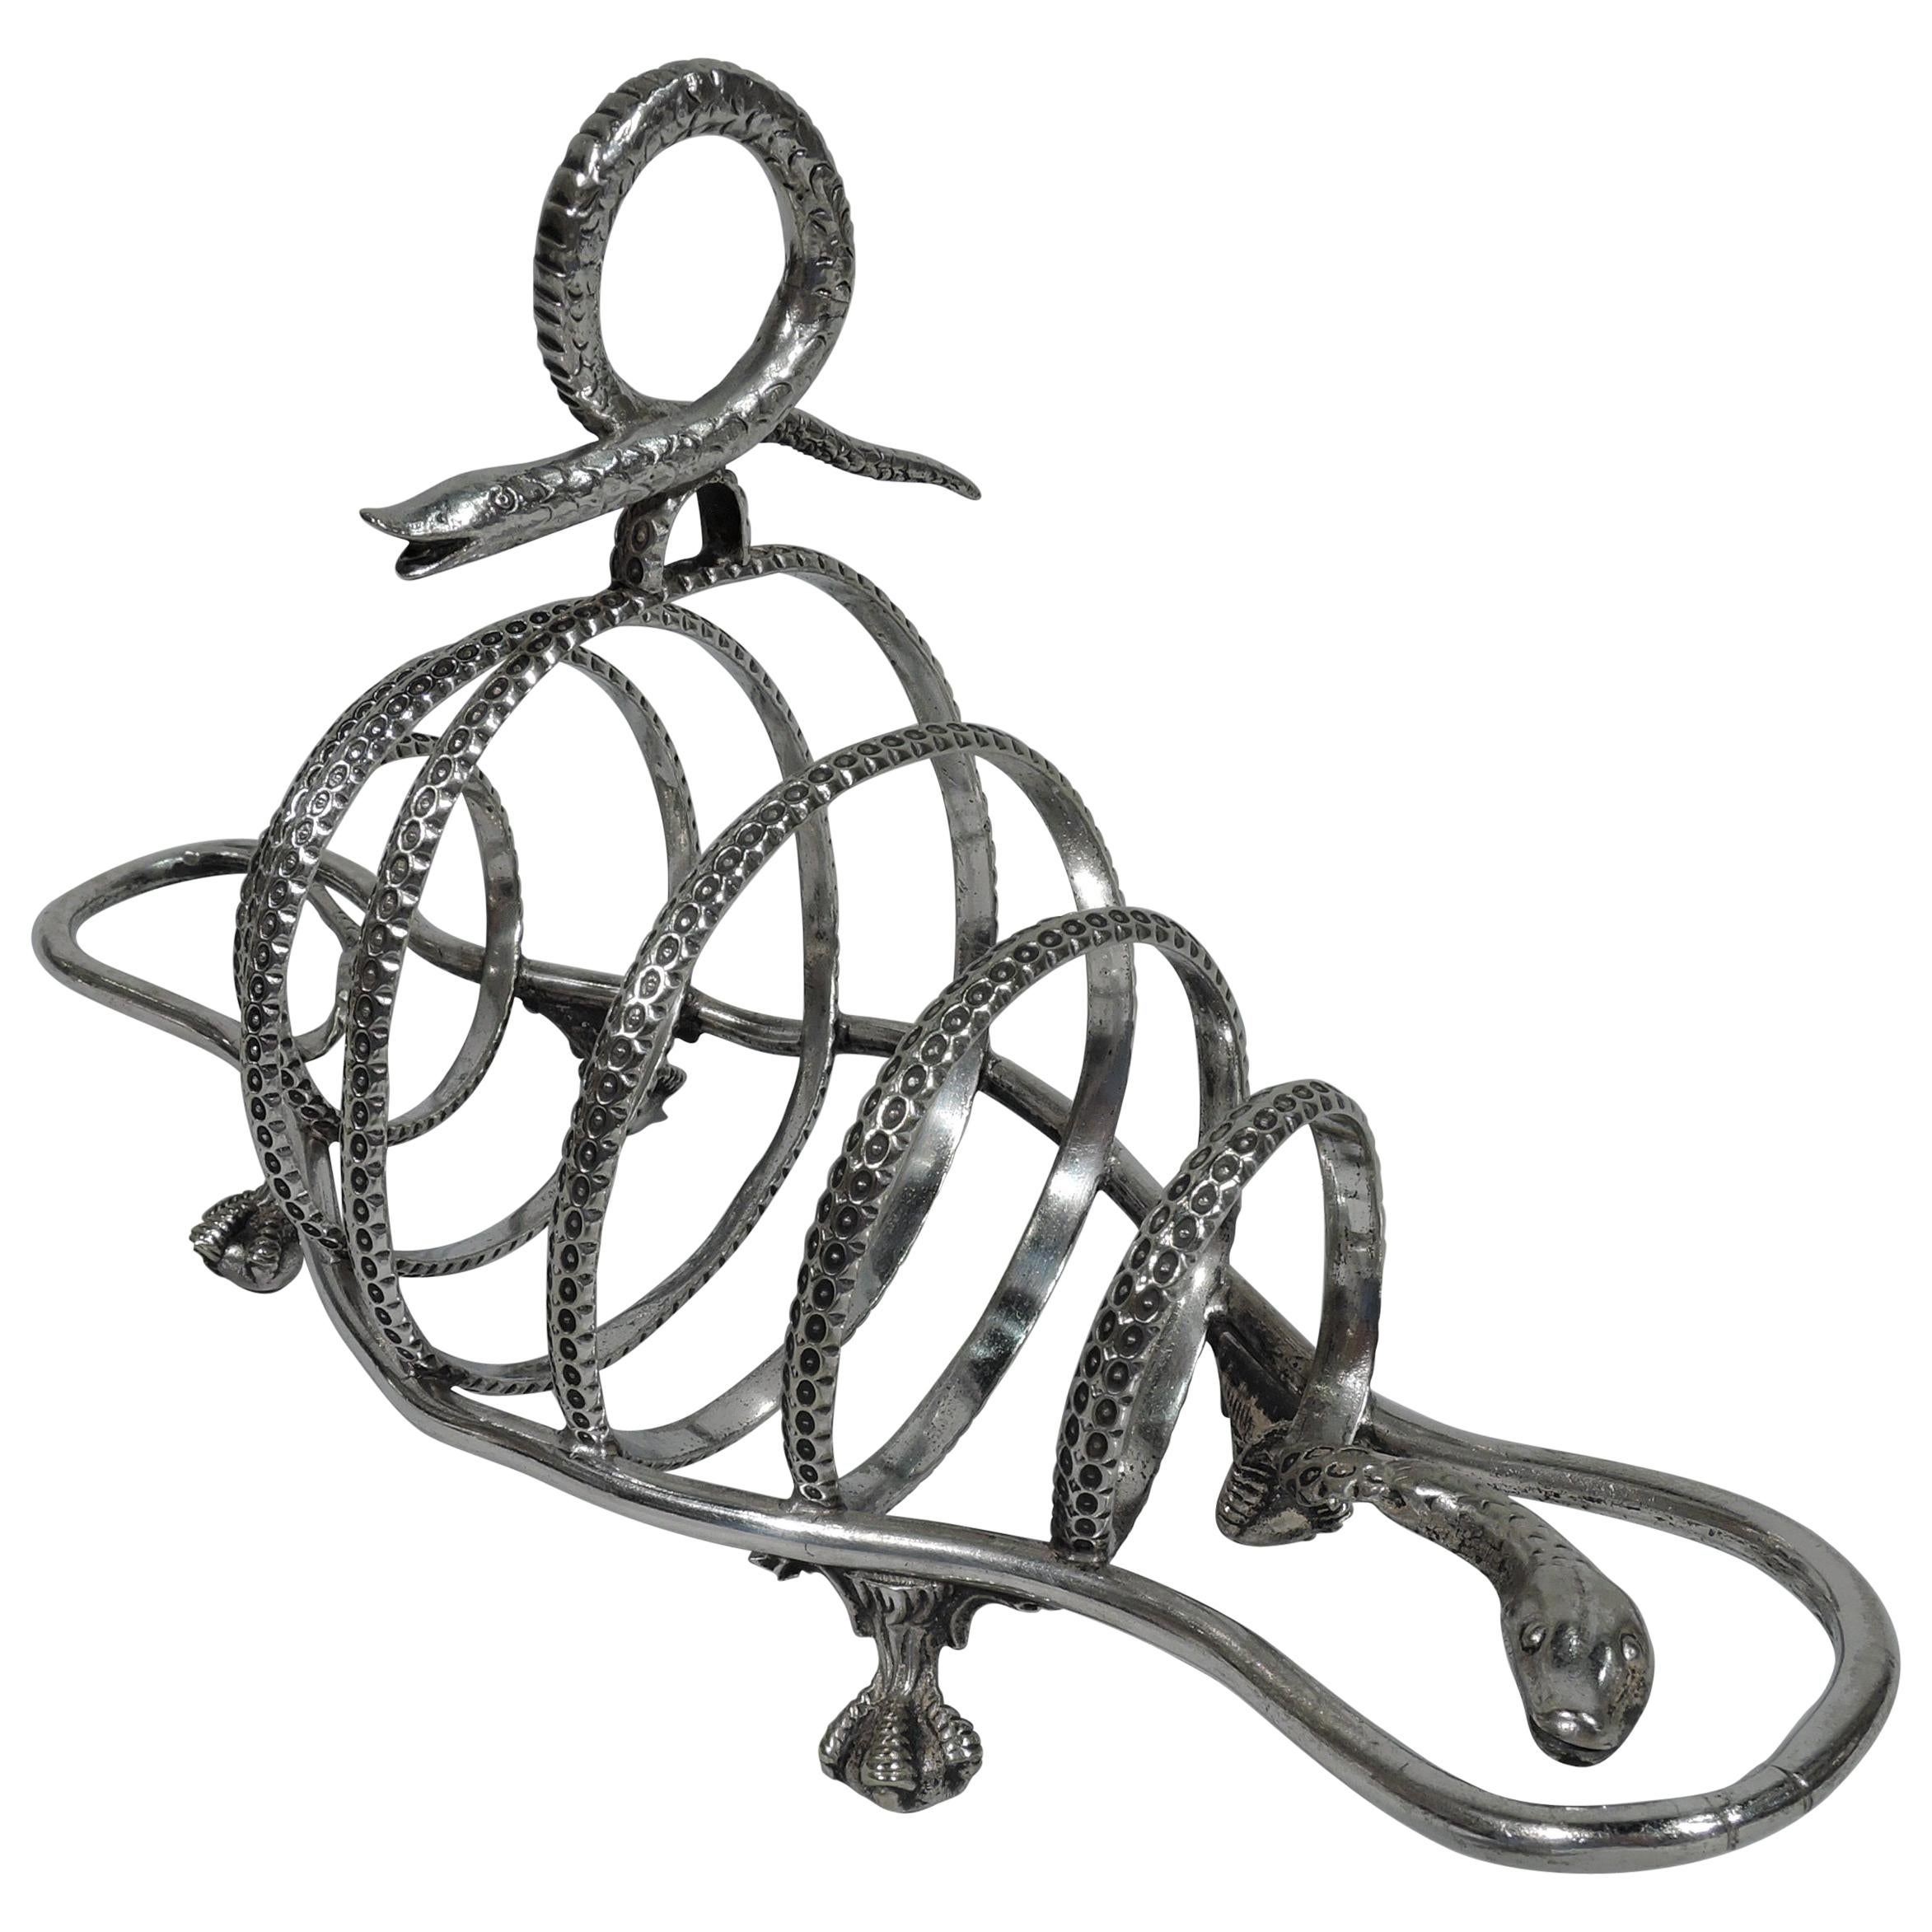 Exciting and Unusual Snake-Form Silver Plate Toast Rack